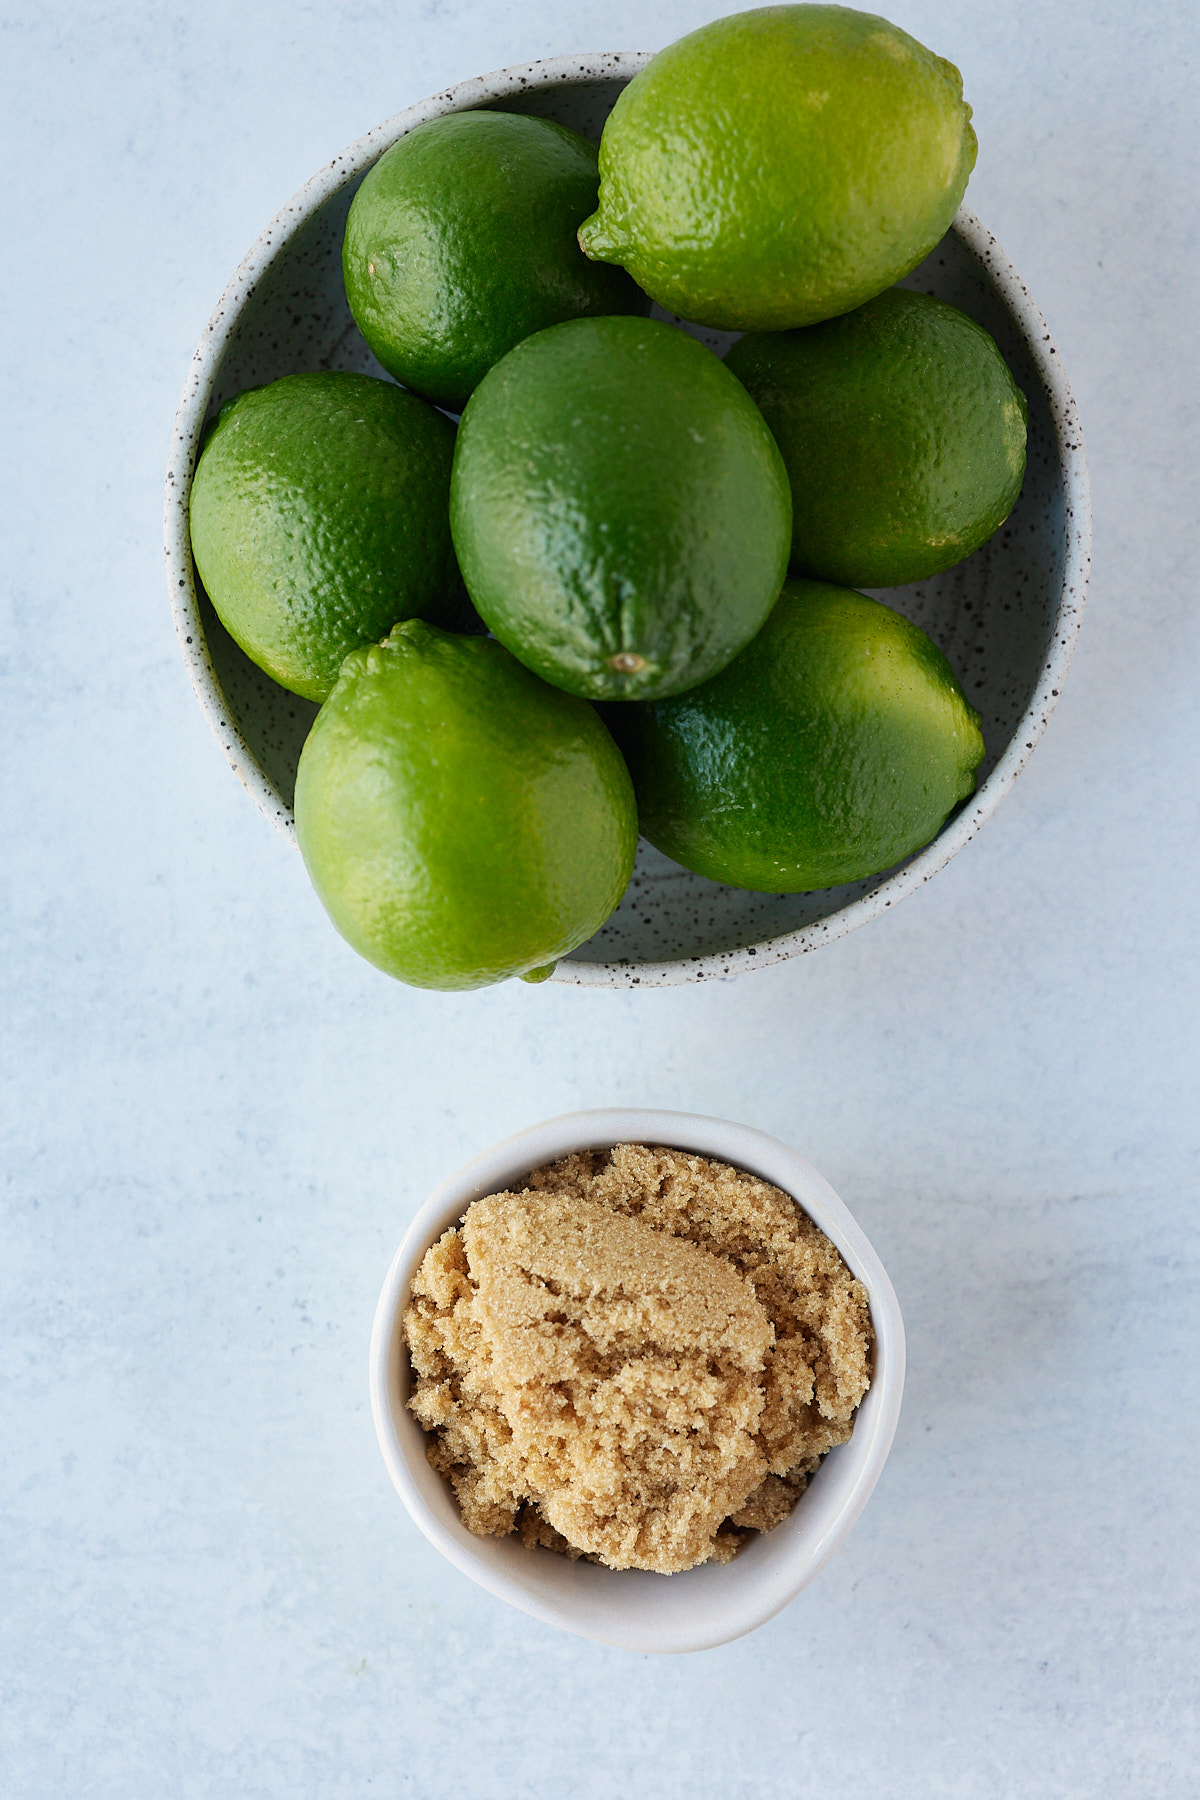 brown sugar and whole limes on ablue background